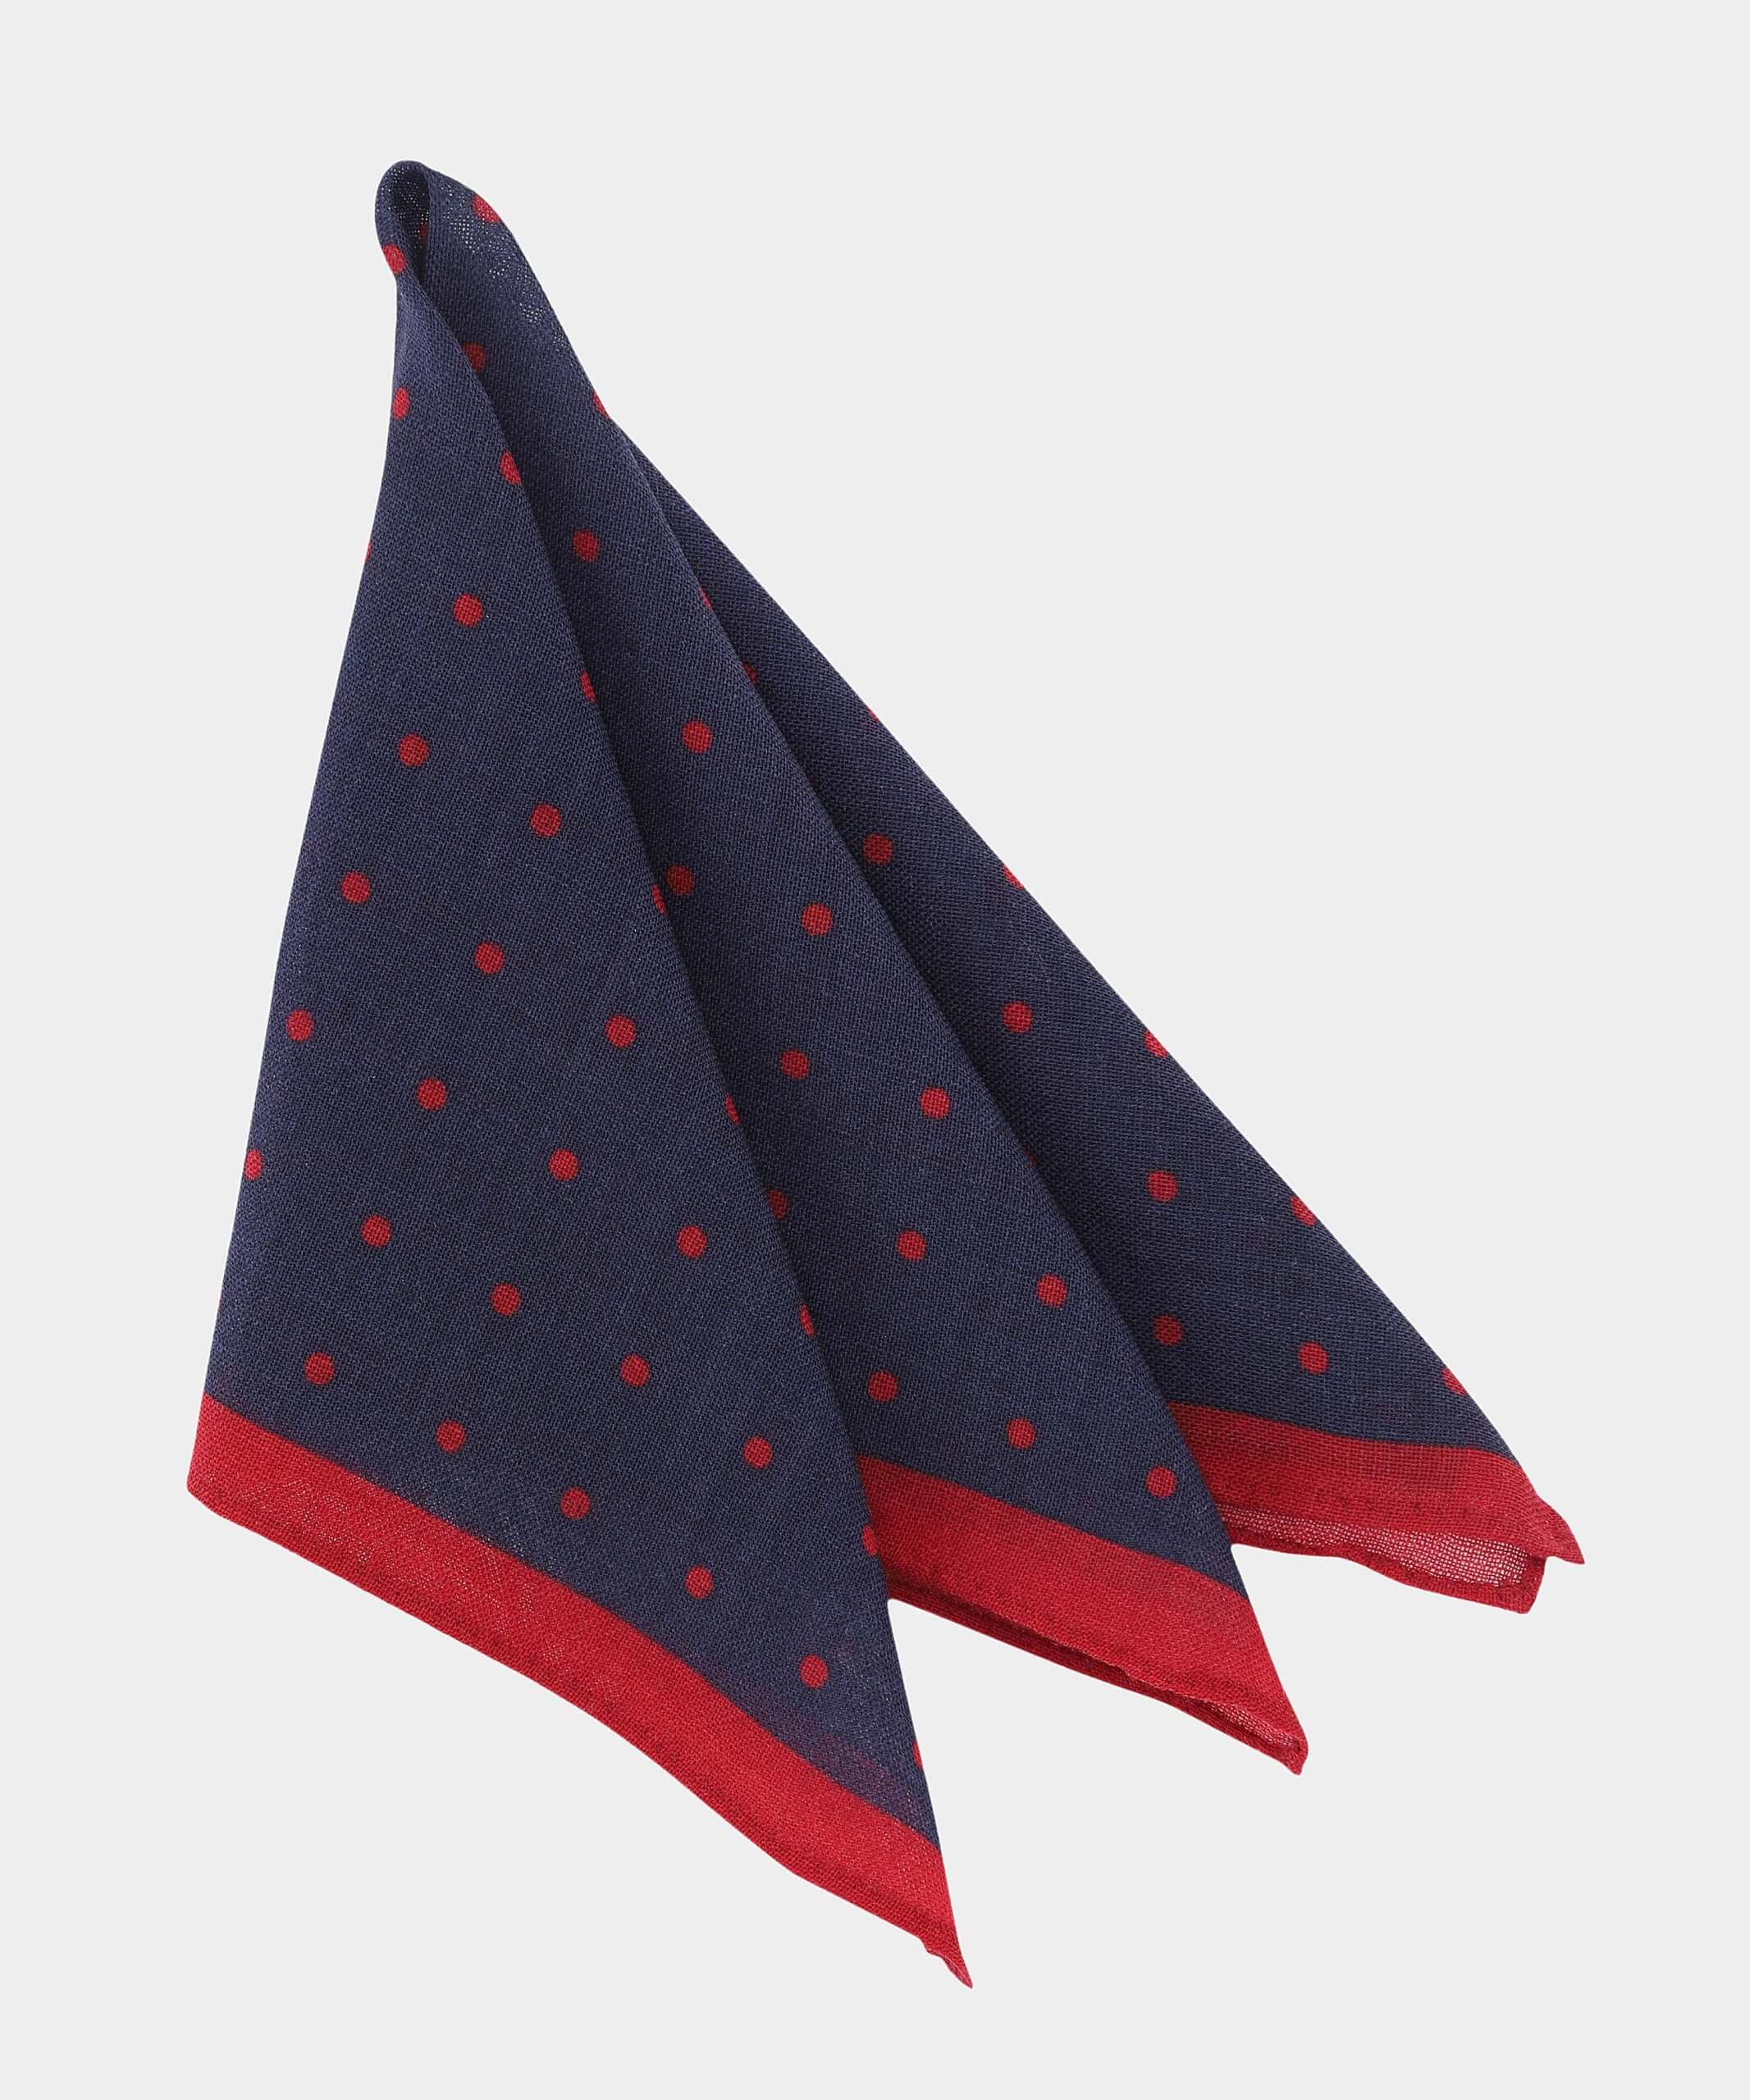 Dotted-Wool-Print-Navy:Red